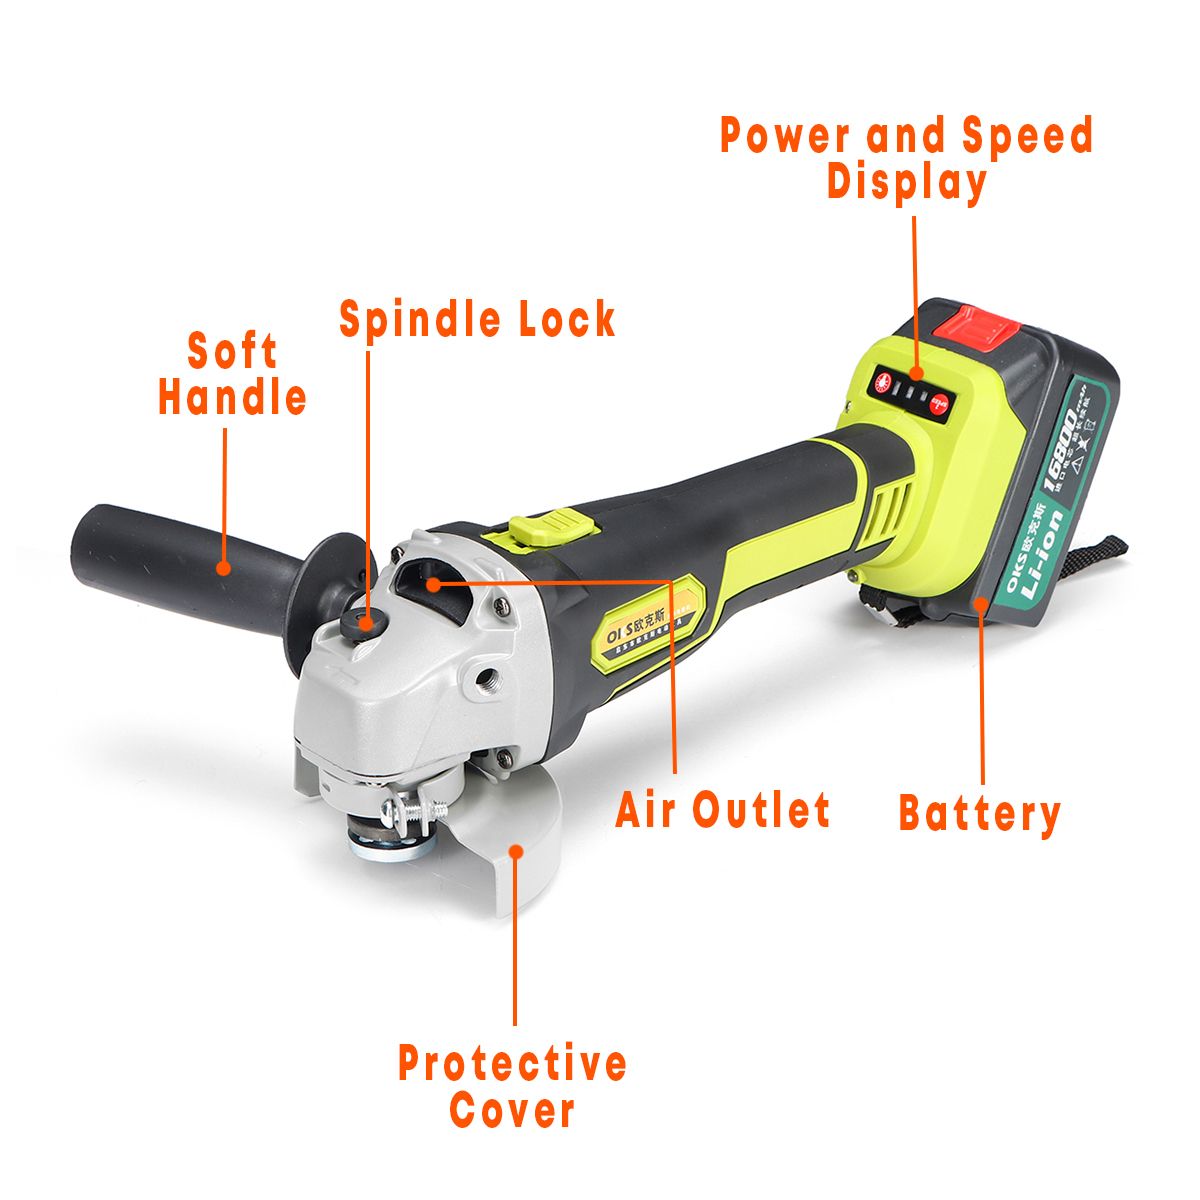 128vt-Angle-Grinder-Cordless-Brushless-Angle-Grinding-Cutting-Machine-Kit-Box-with-16800mAh-Battery-1576535